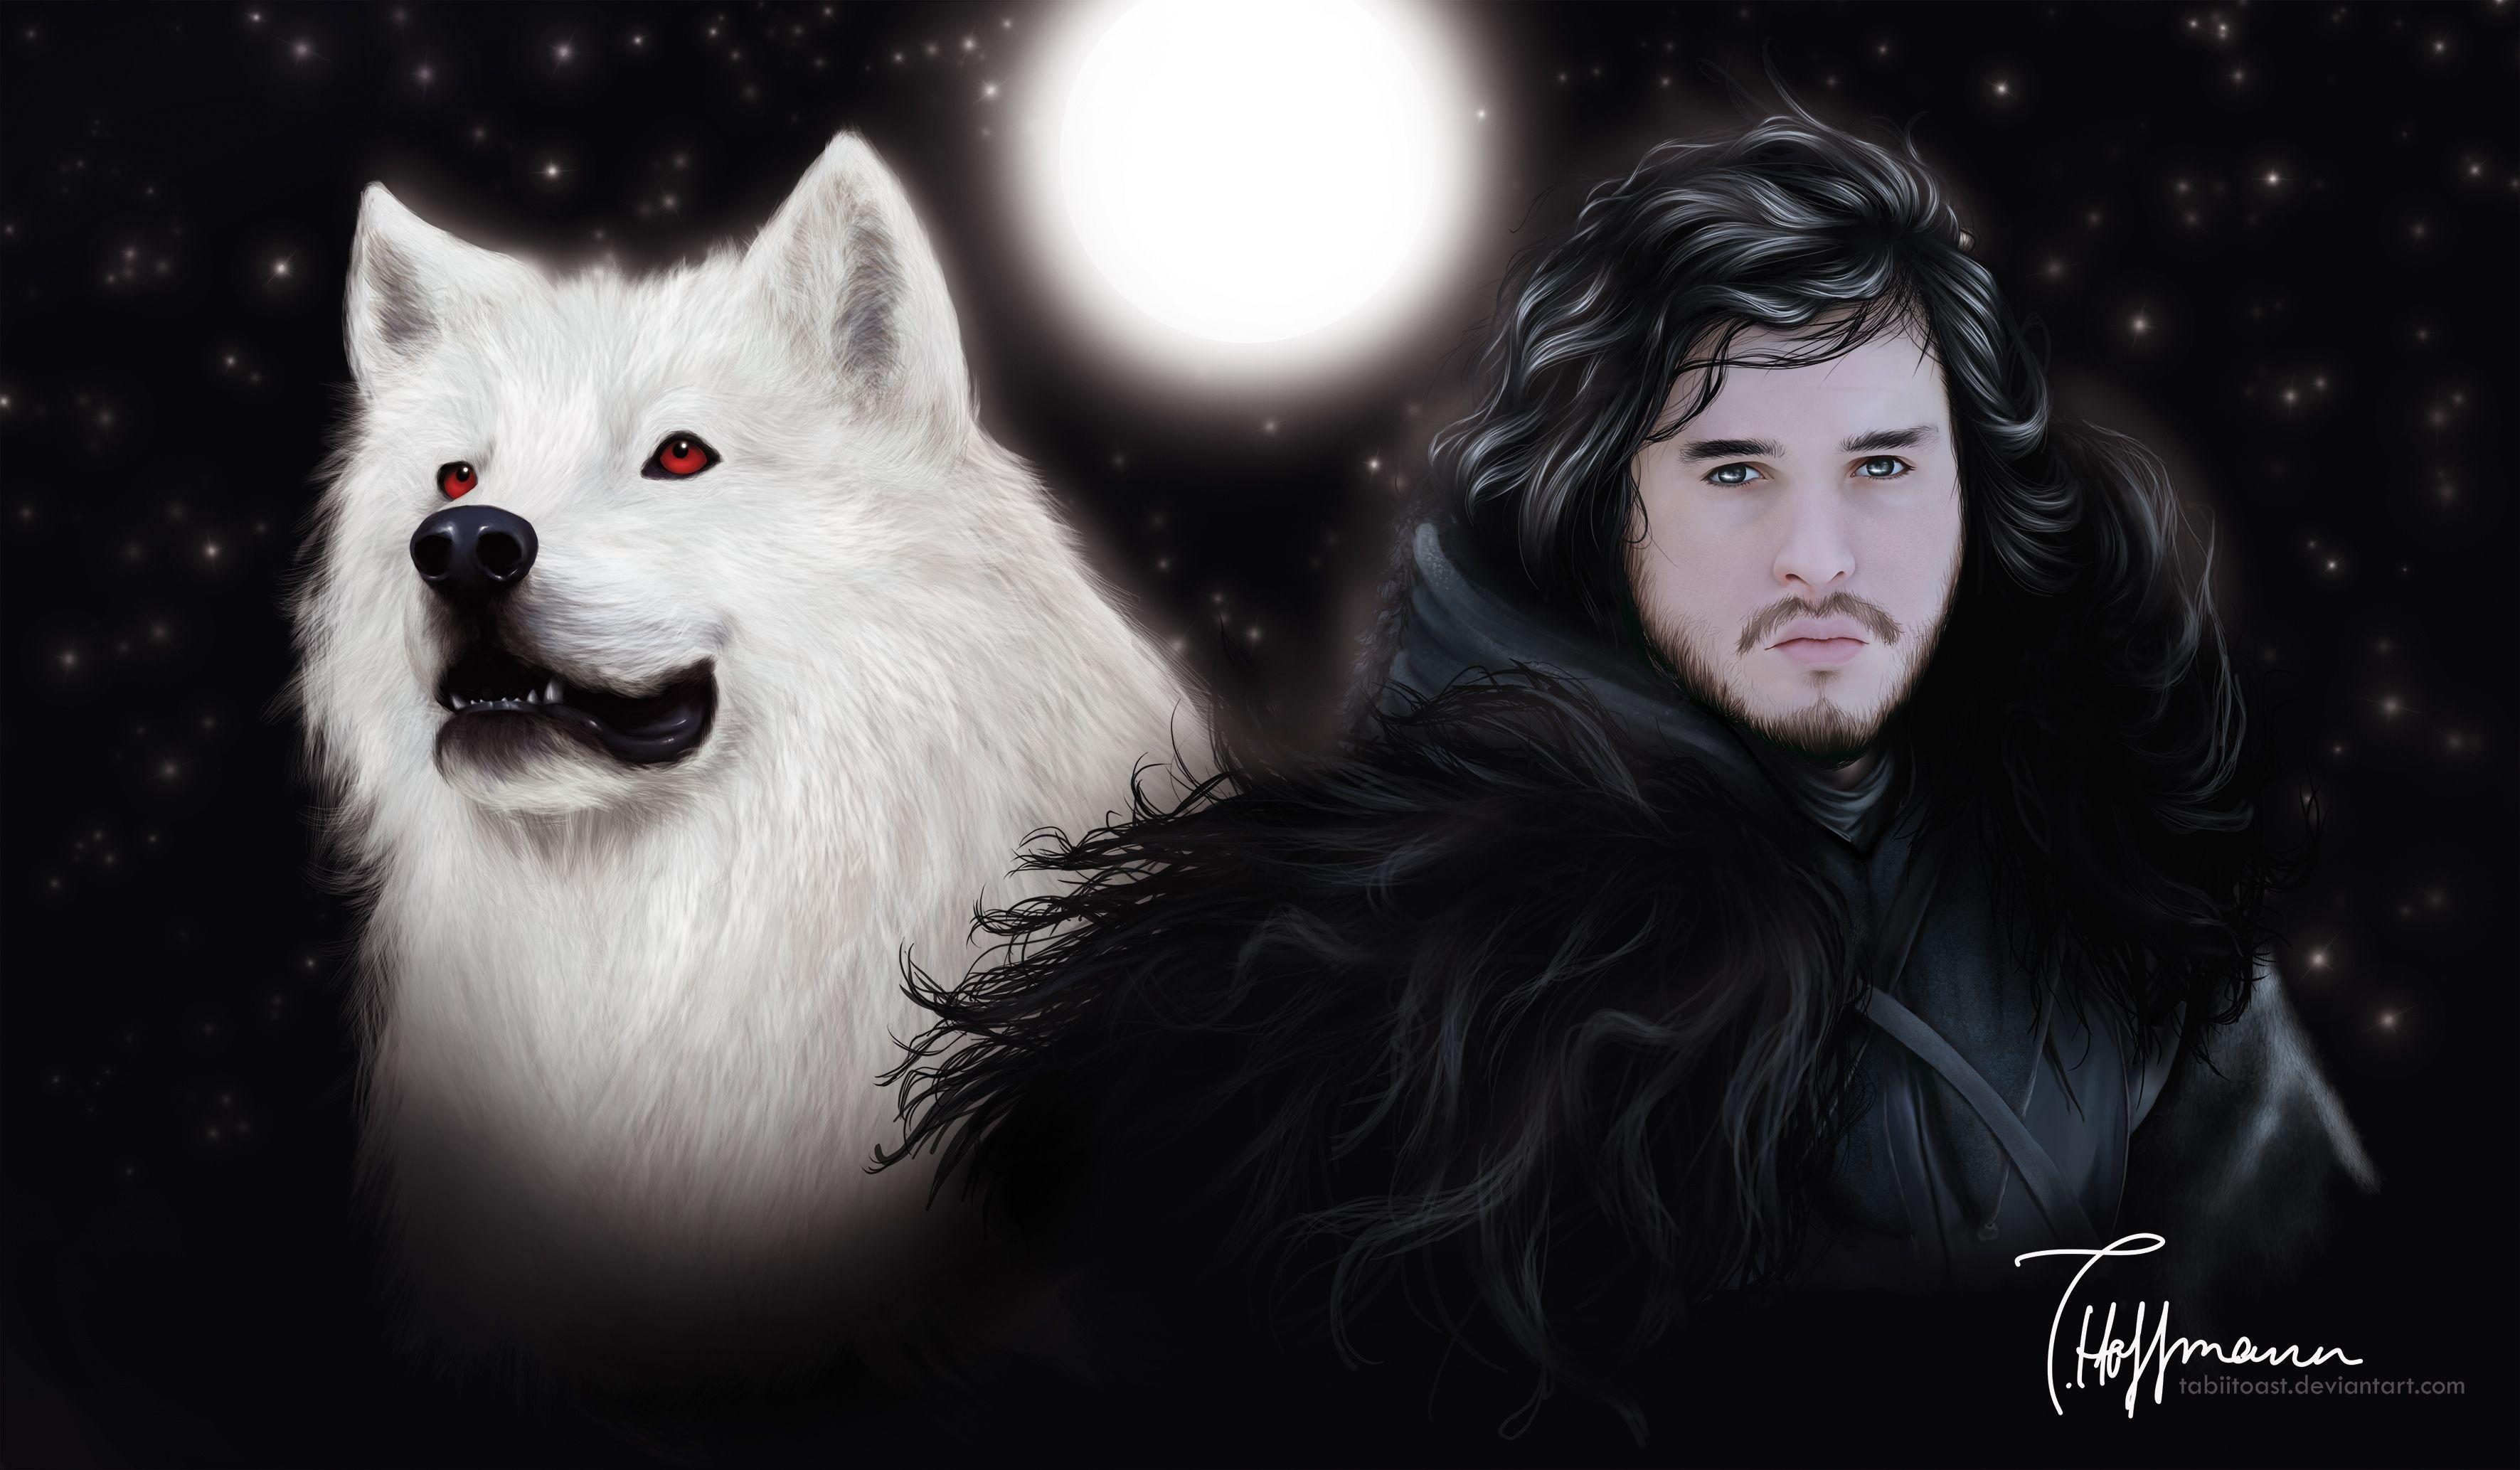 Jon Snow and the Ghost of Thrones Wallpaper (3543x2067)